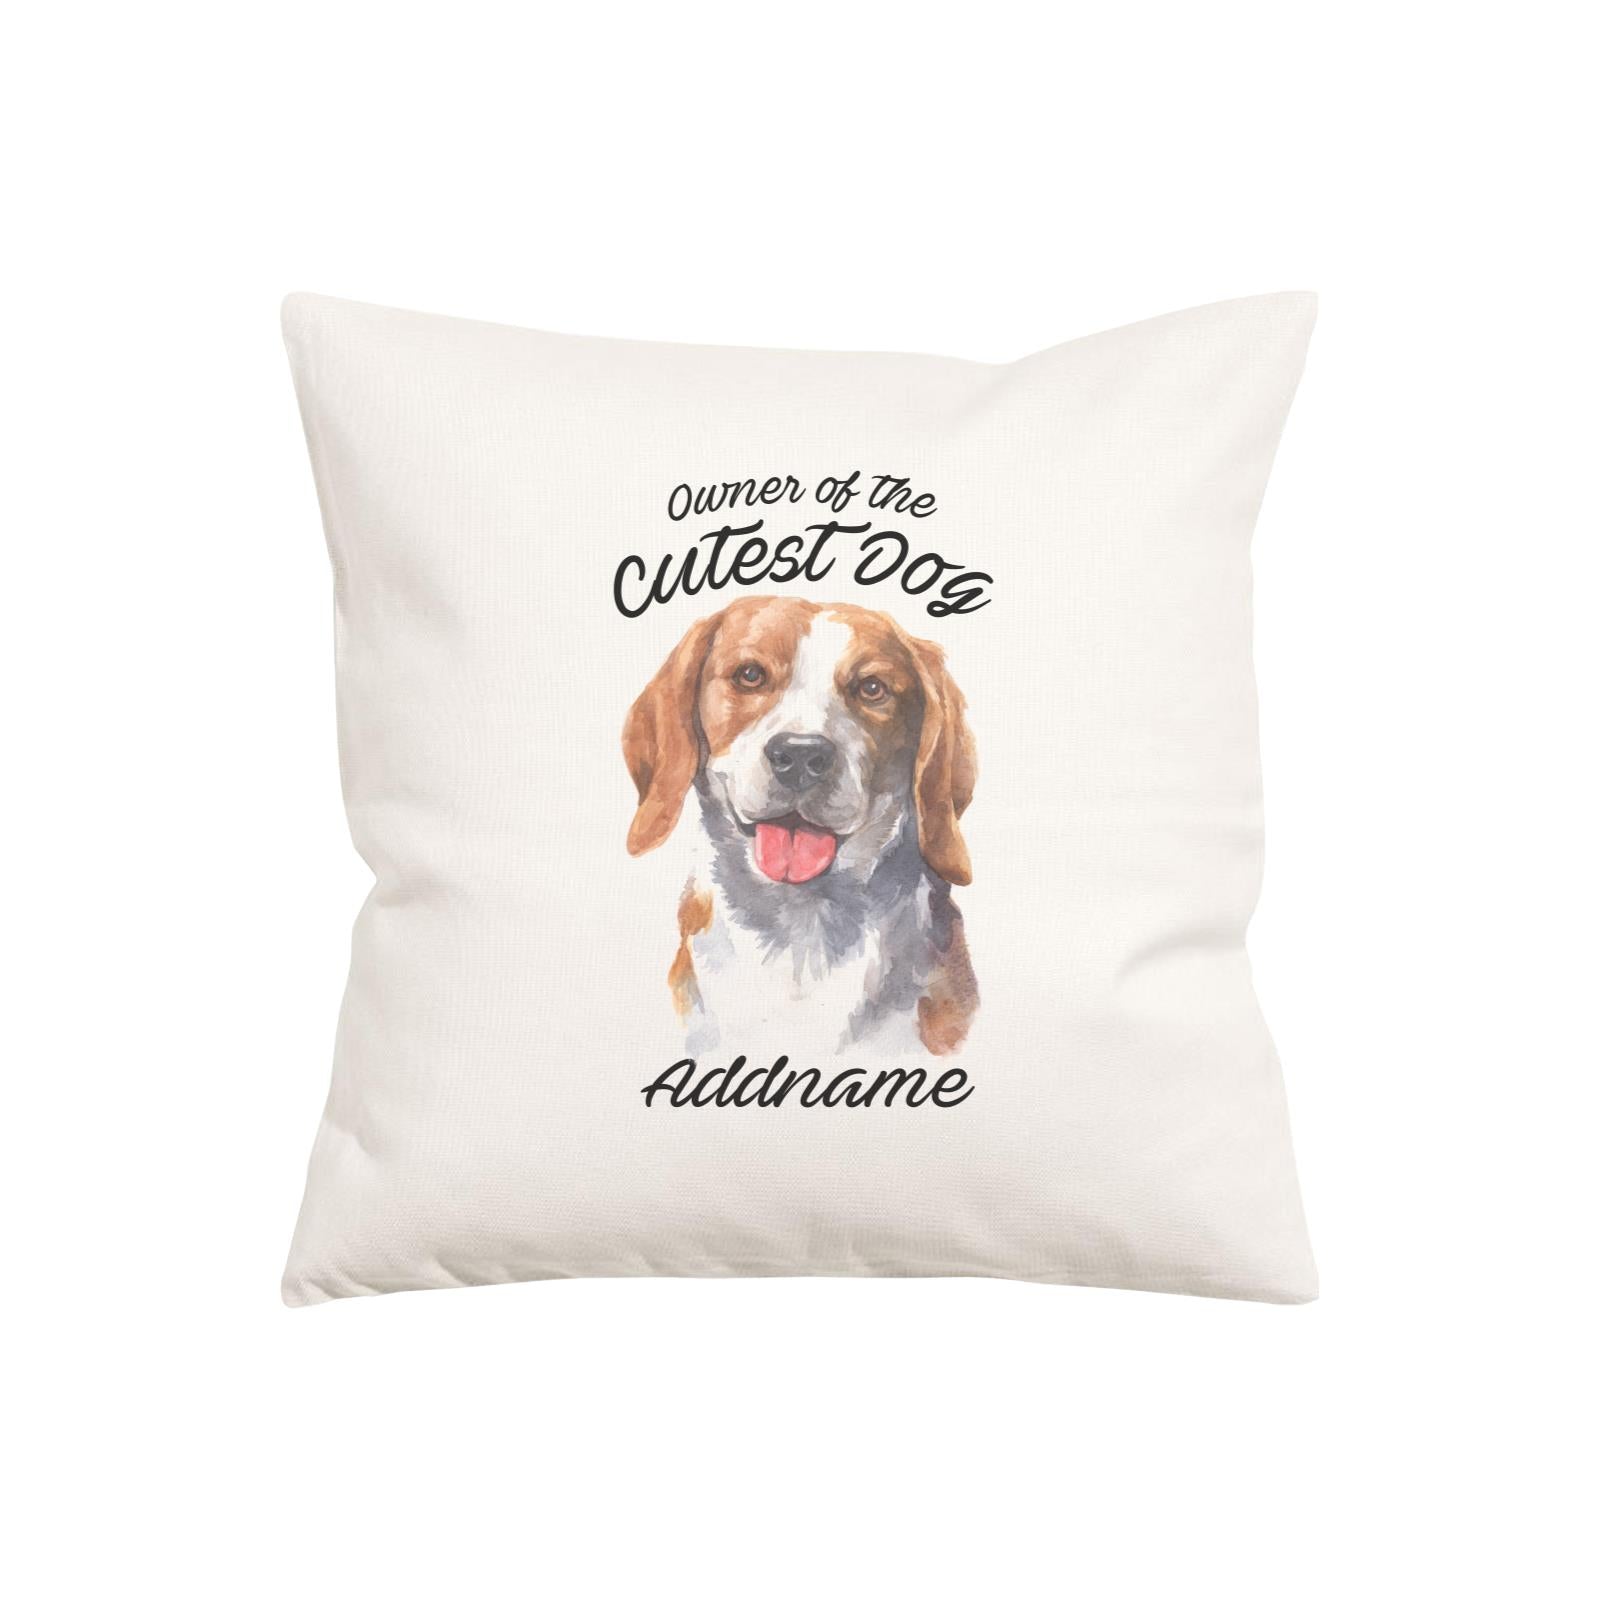 Watercolor Dog Owner Of The Cutest Dog Beagle Smile Addname Pillow Cushion